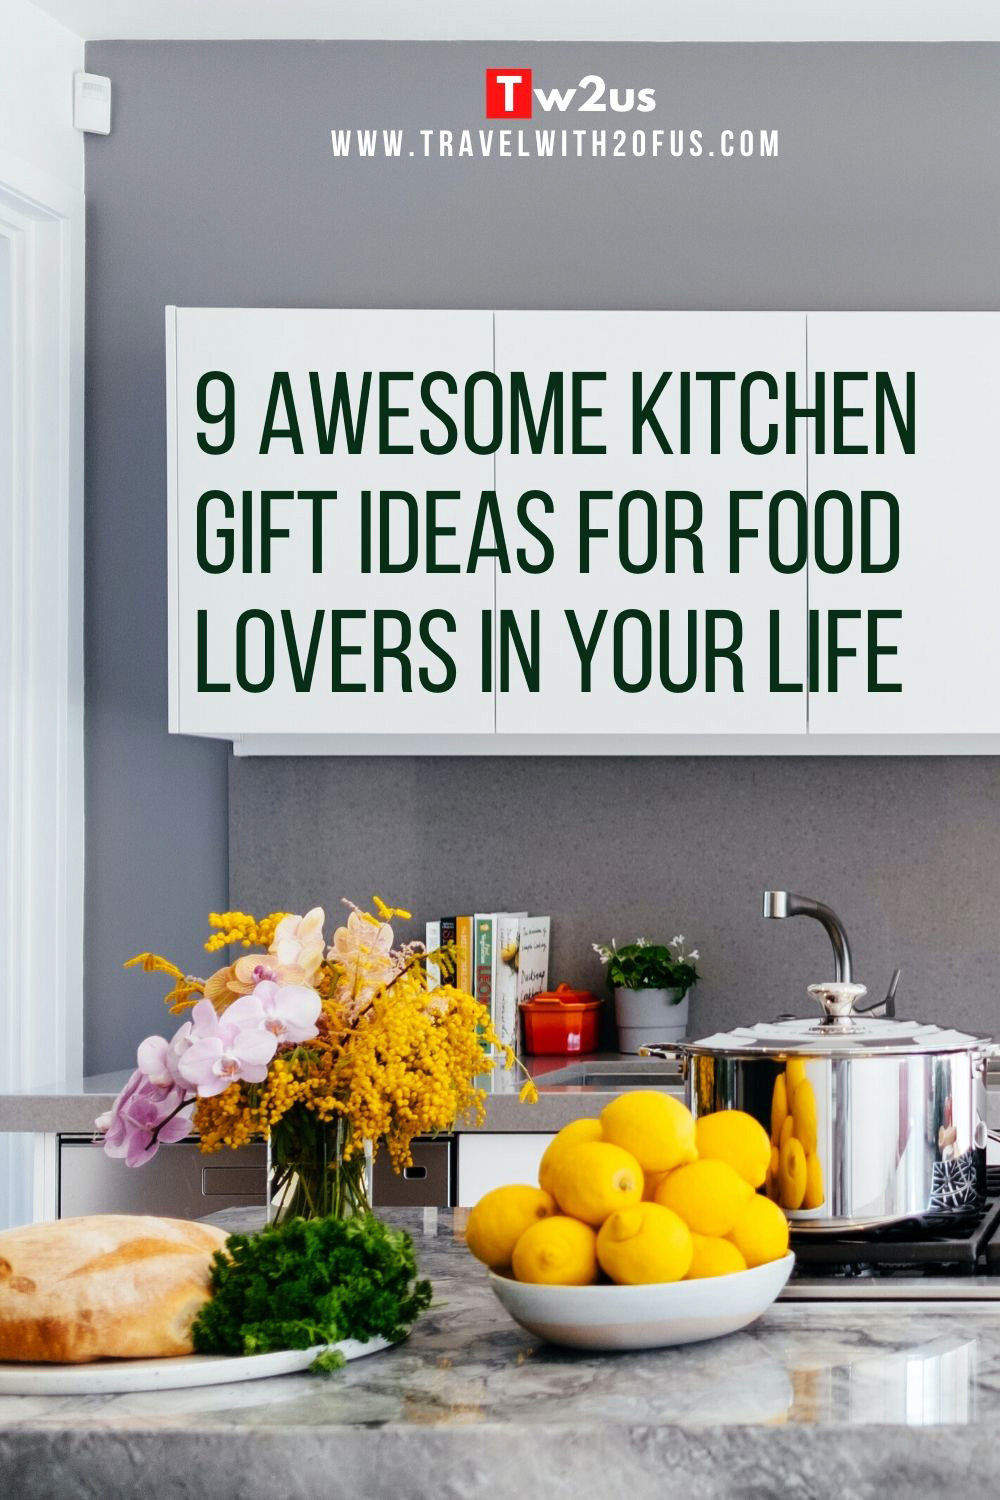 https://www.travelwith2ofus.com/images/kitchen-gifts-ideas-for-foodies.jpg